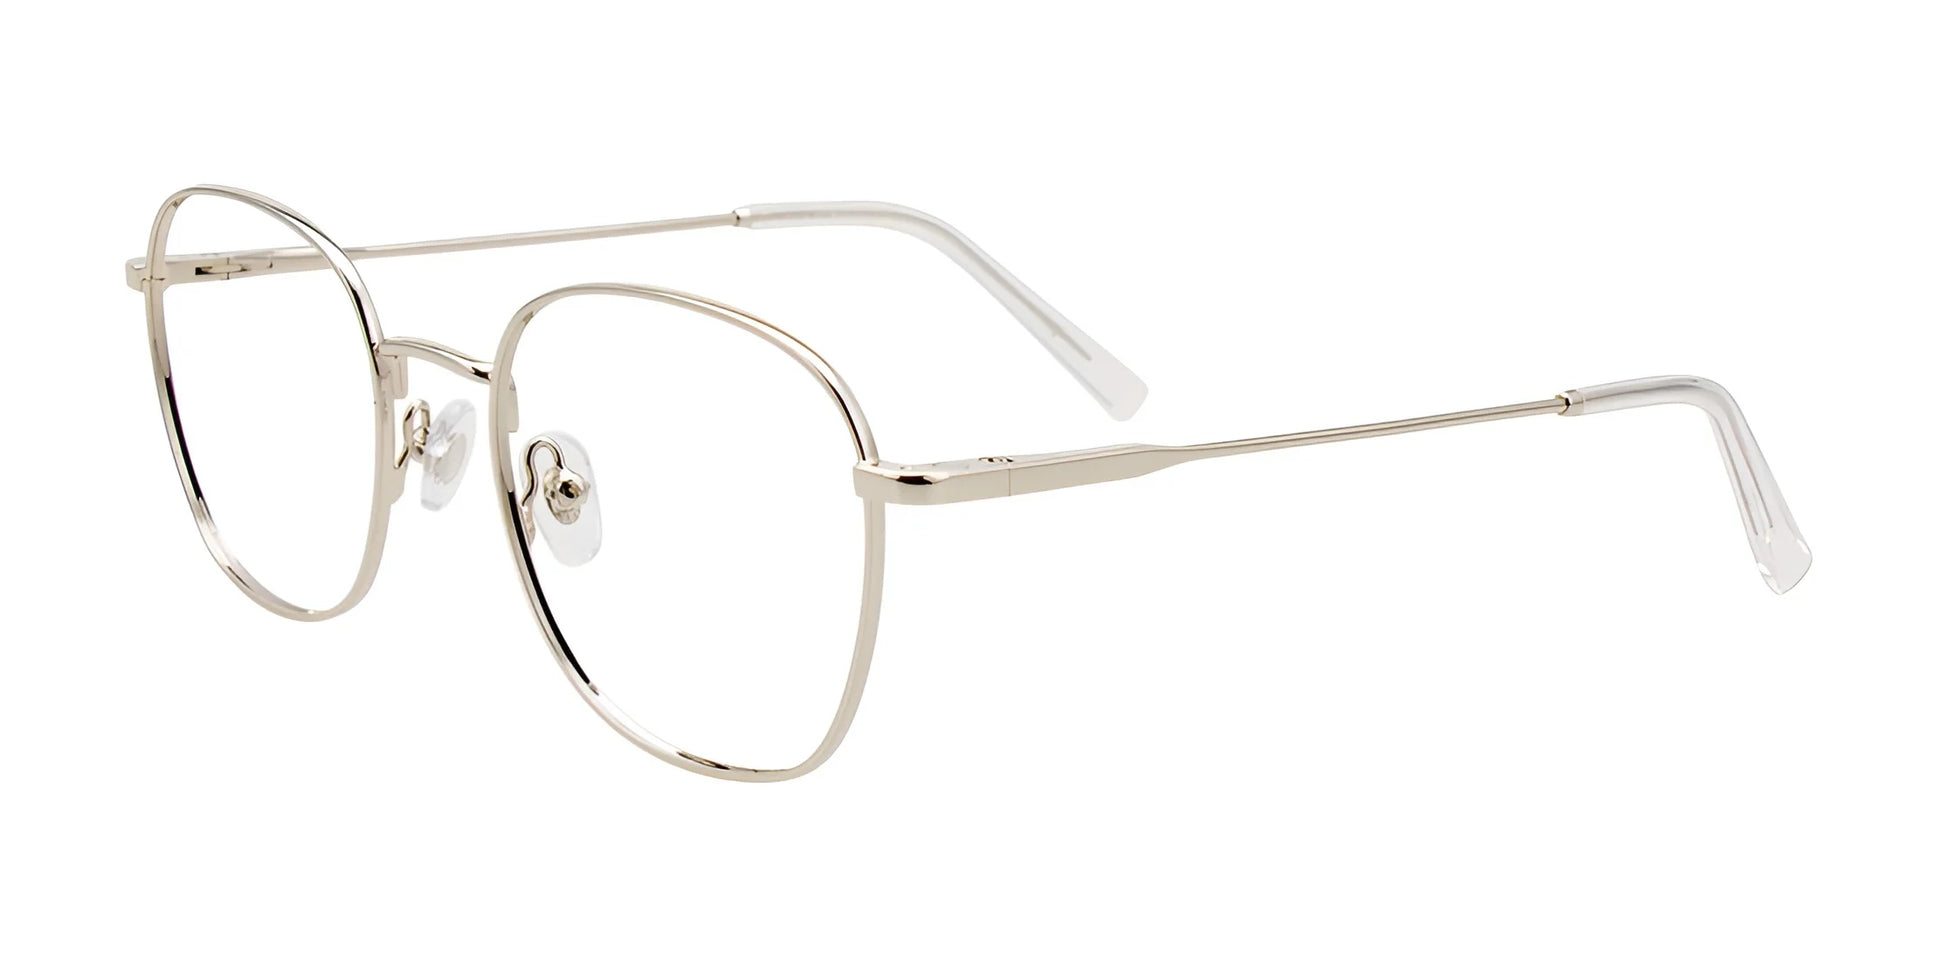 CoolClip CC851 Eyeglasses with Clip-on Sunglasses Steel